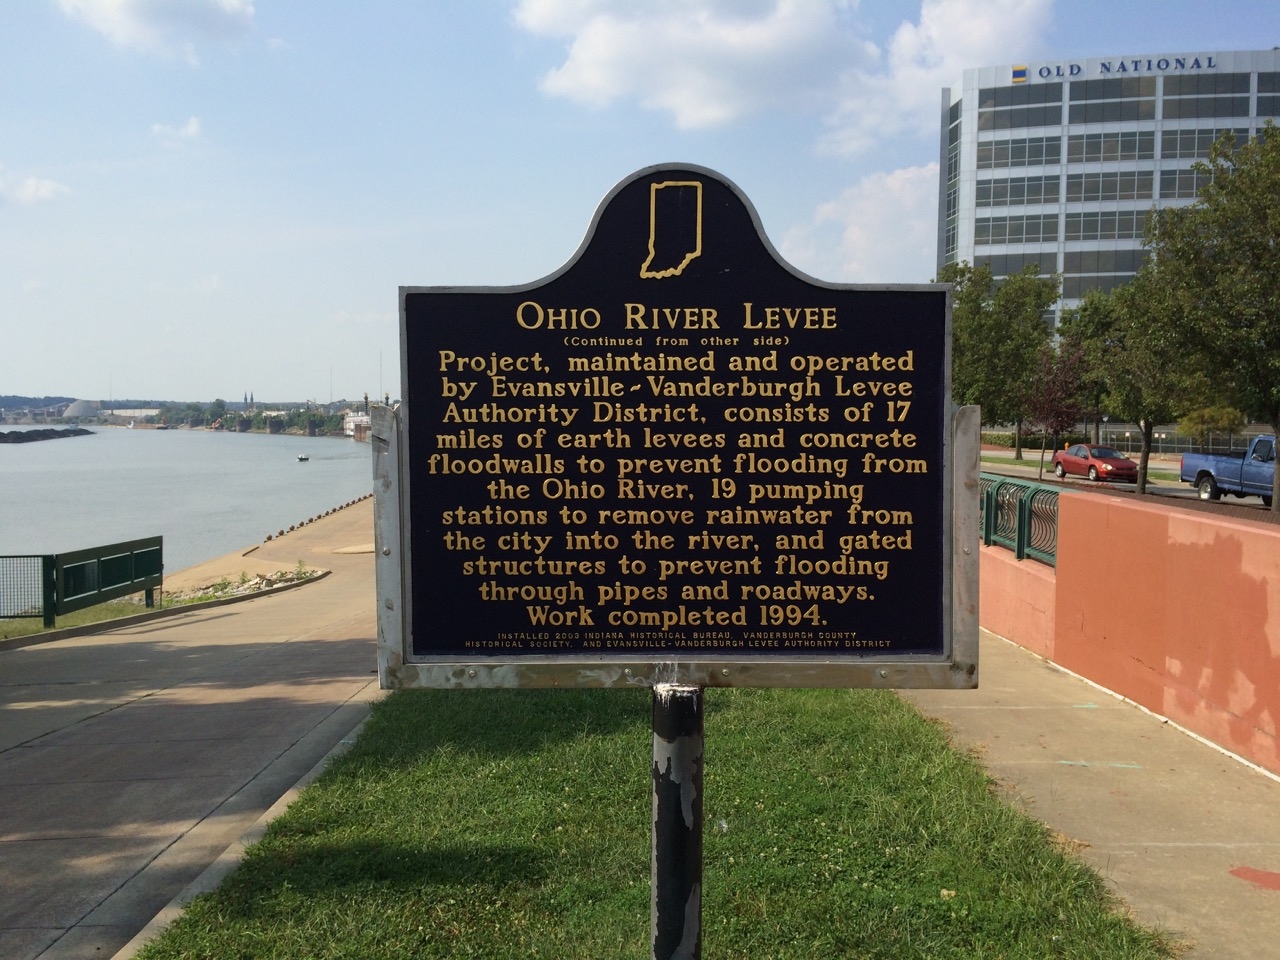 The marker is located on the Riverside Plaza.